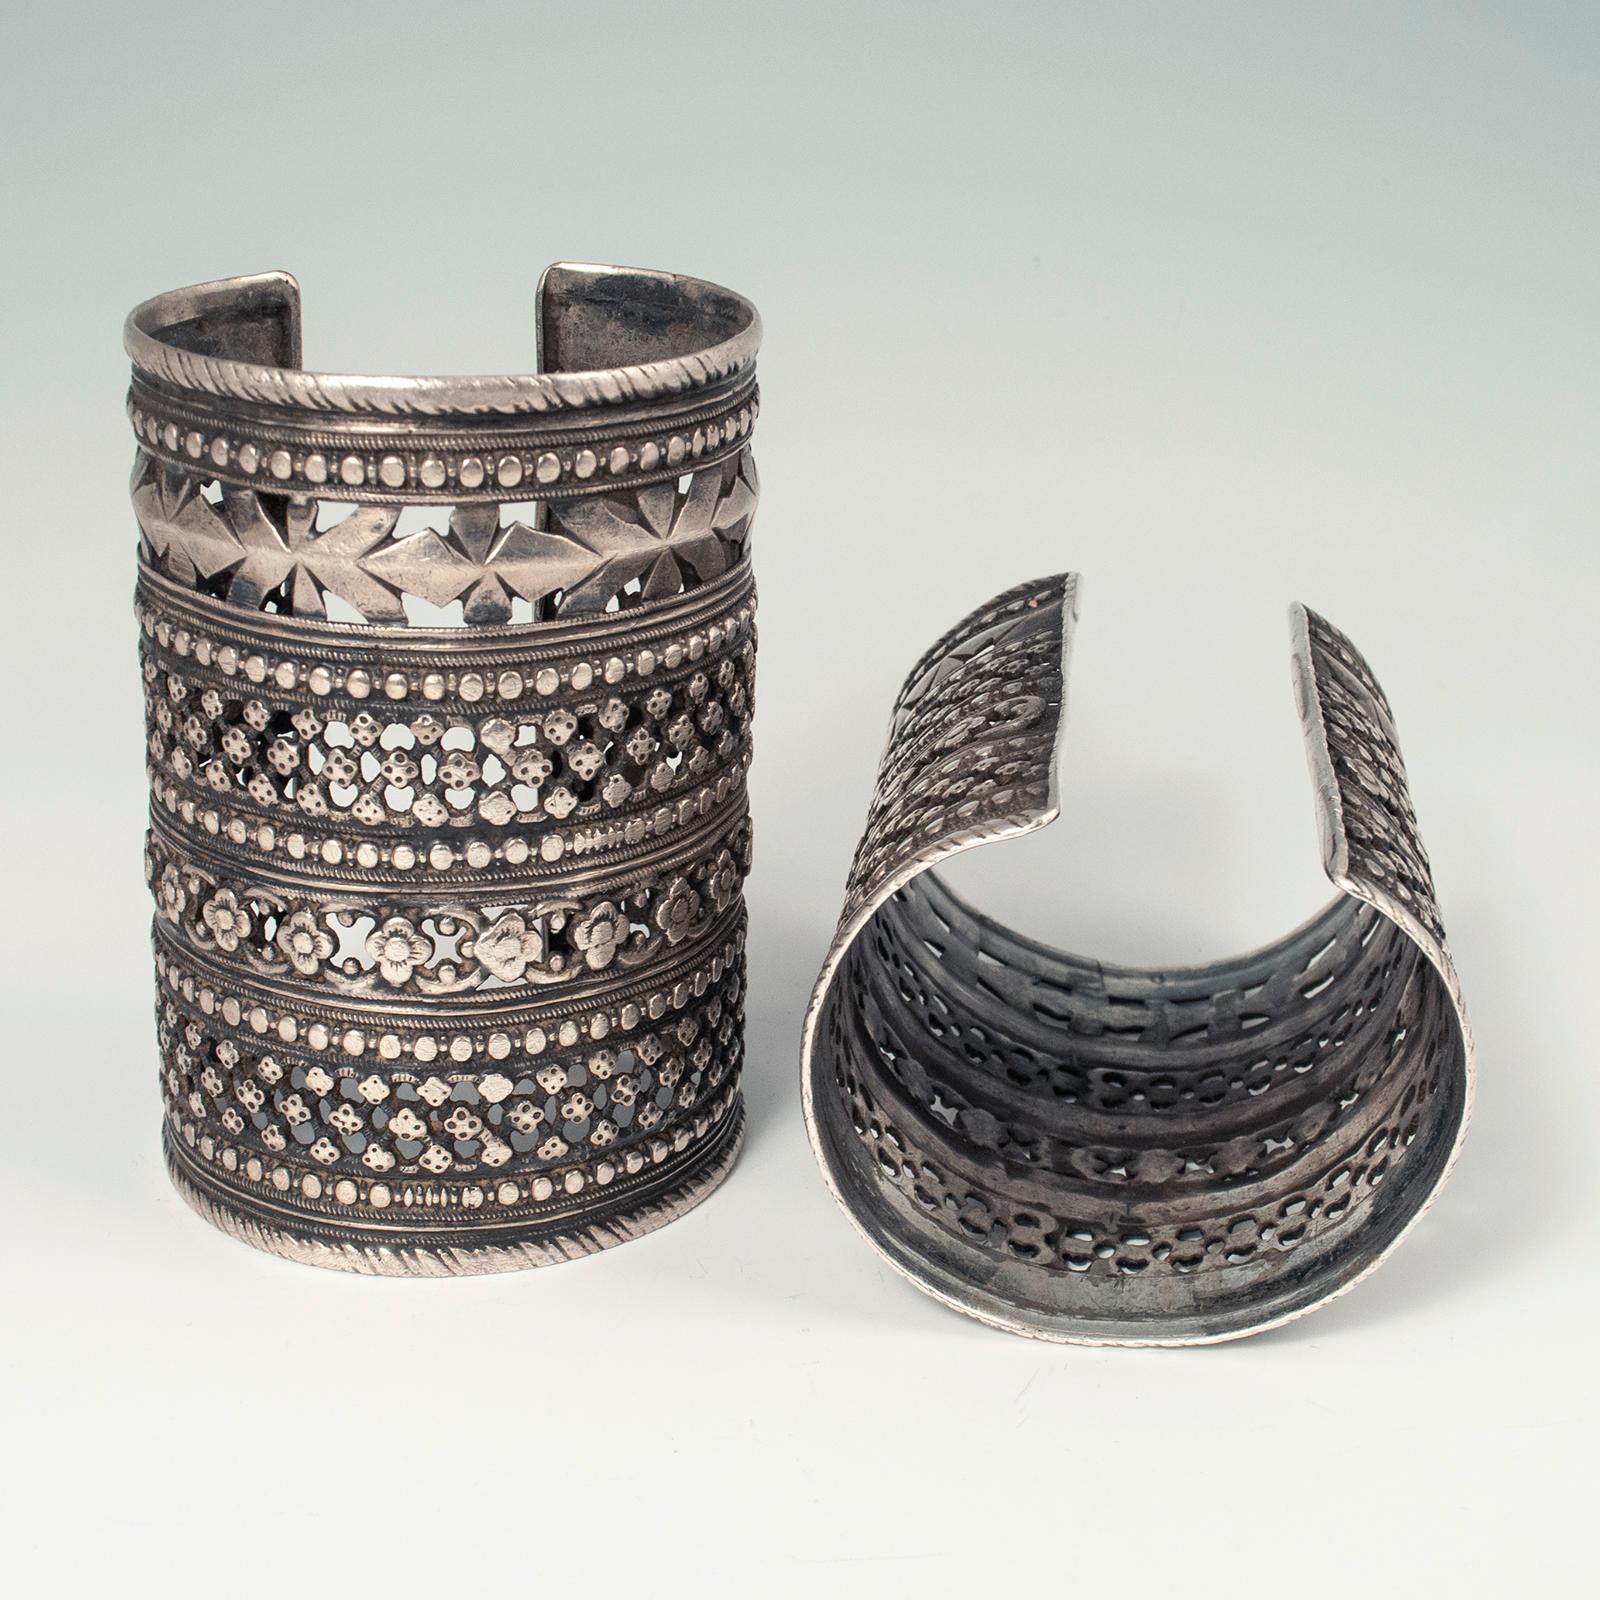 Hand-Crafted Mid-20th Century Silver Cuffs, Hazara Triba, Afghanistan For Sale